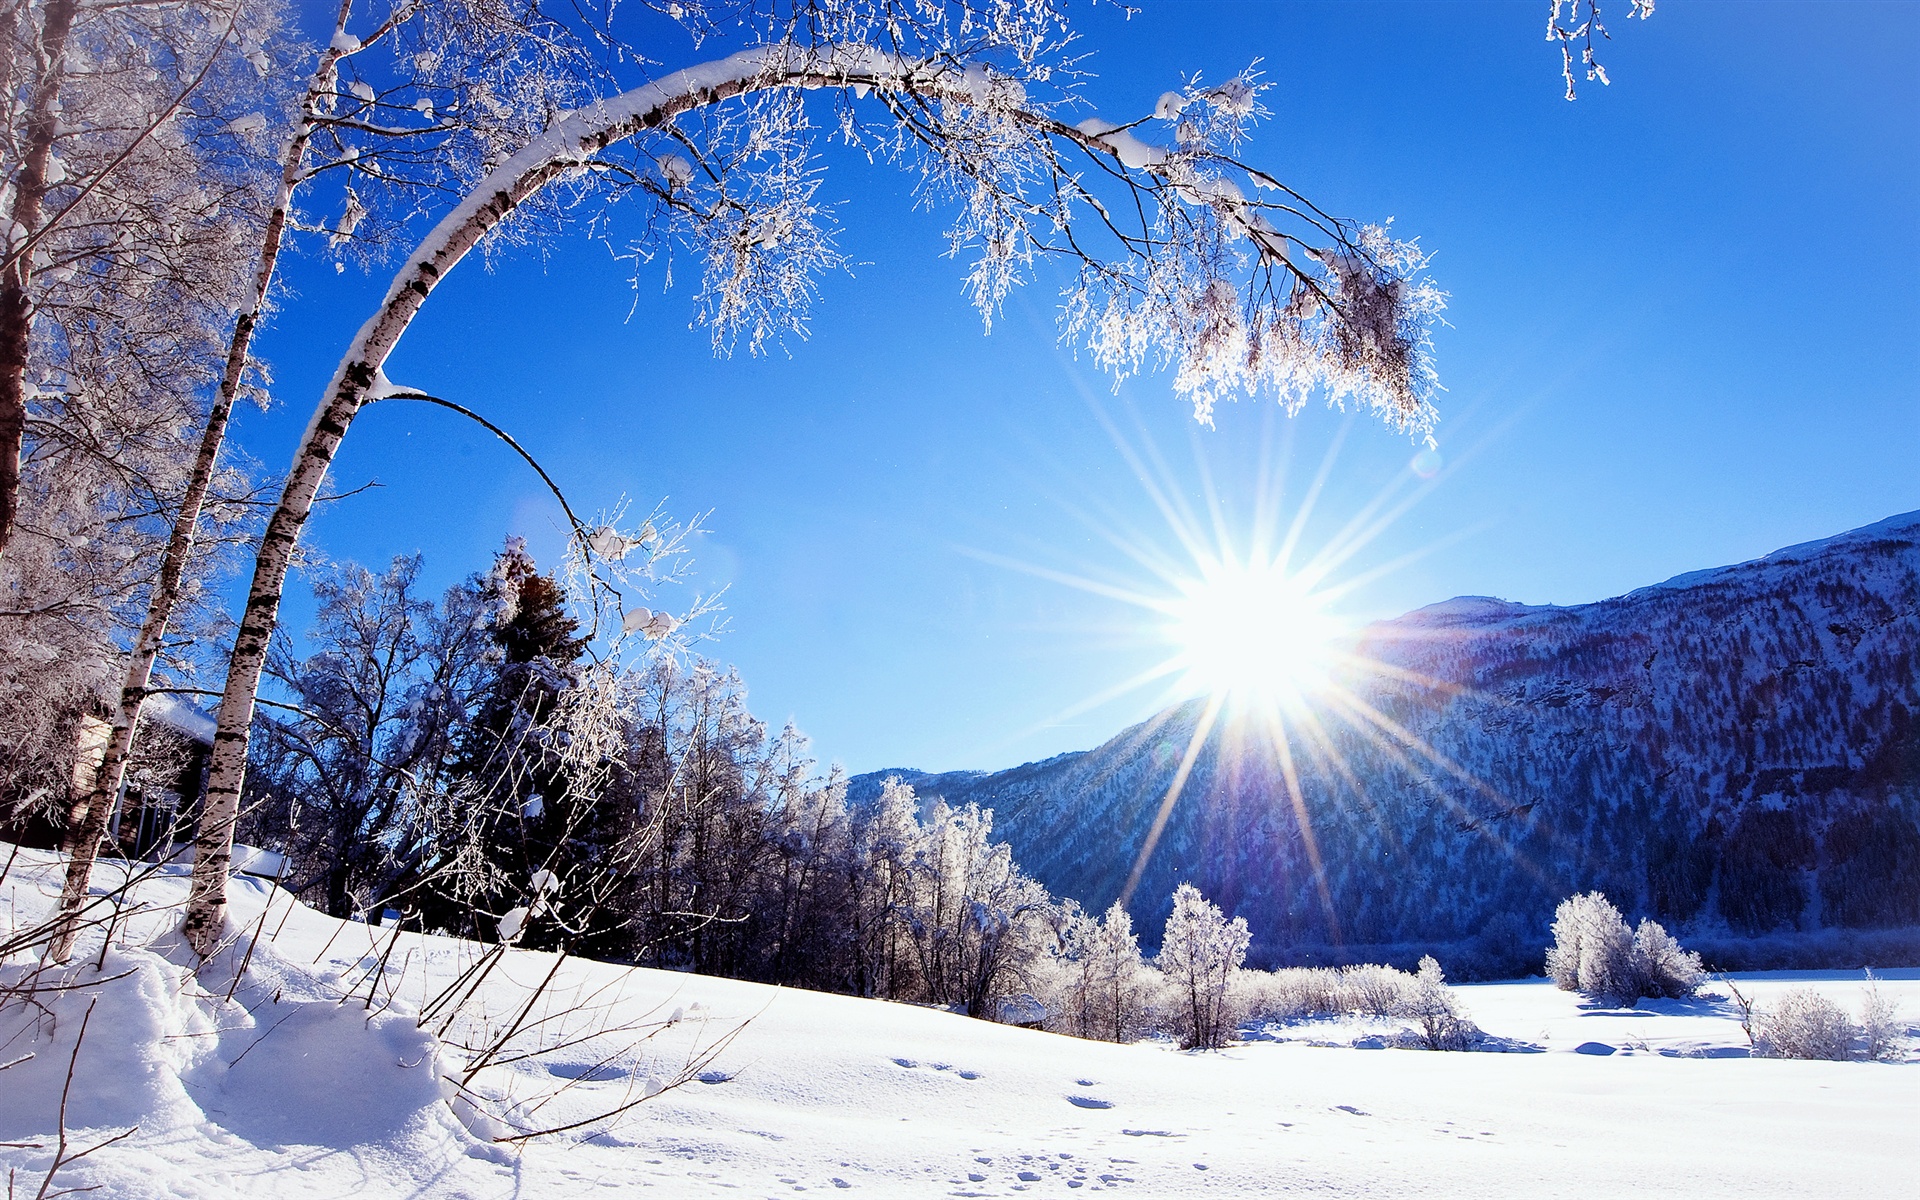 Winter, snow, mountains and trees, white scenery, dazzling ...